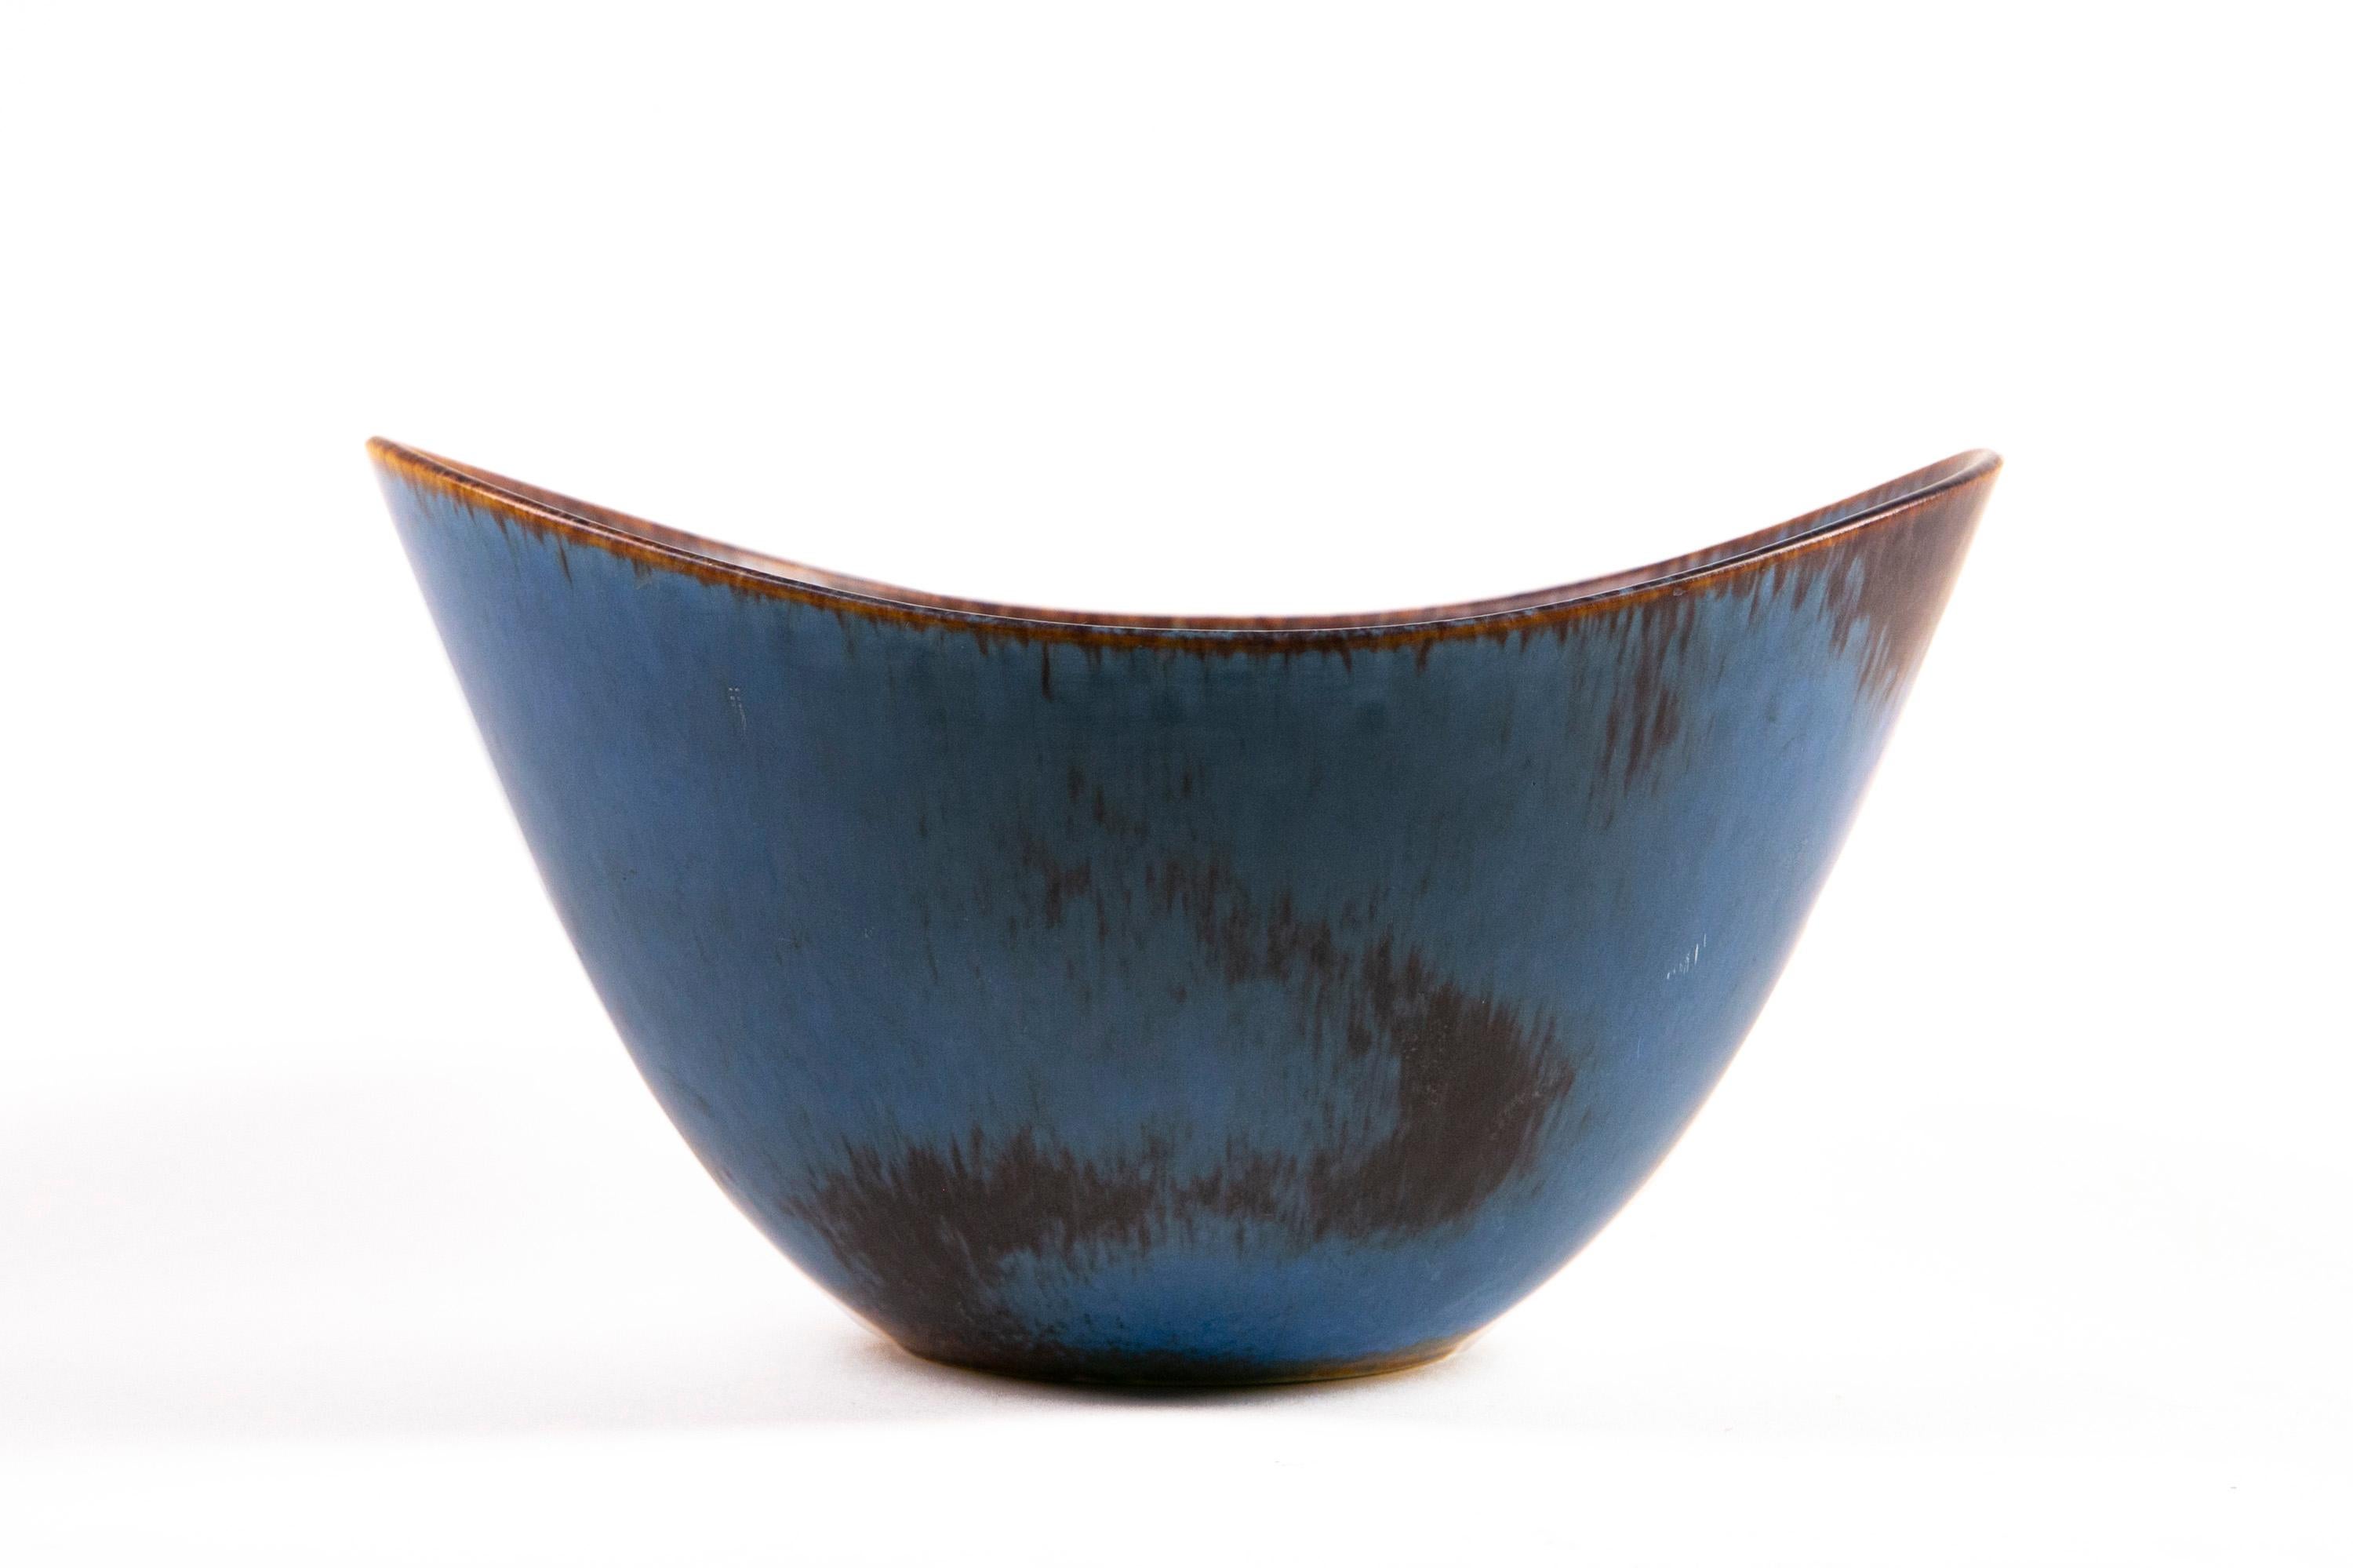 Gunnar Nylund Rörstrand large AXK bowl blue an Ocher Hares Fur glaze Sweden 1950.

This unique and large stoneware bowl is glazed with a delicate yet bold blue hares fur glaze with a complimenting ochre rim highlight was made by Rörstrand and